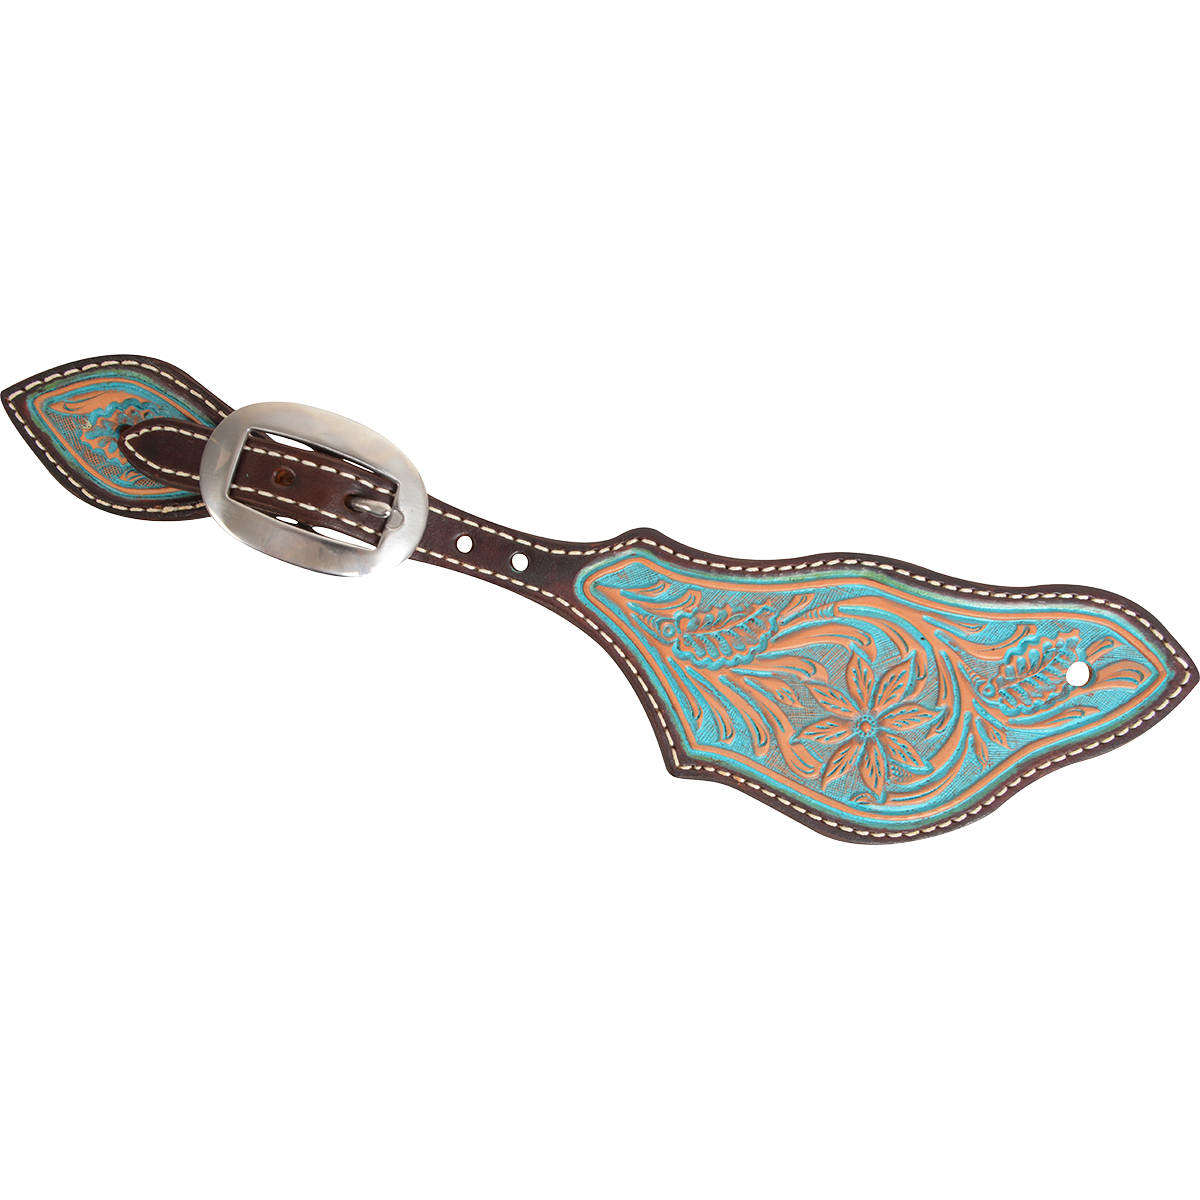 Spur Strap #62 Natural Skirting Leather Strap With Desert Flower Tooling with Turquoise Wash